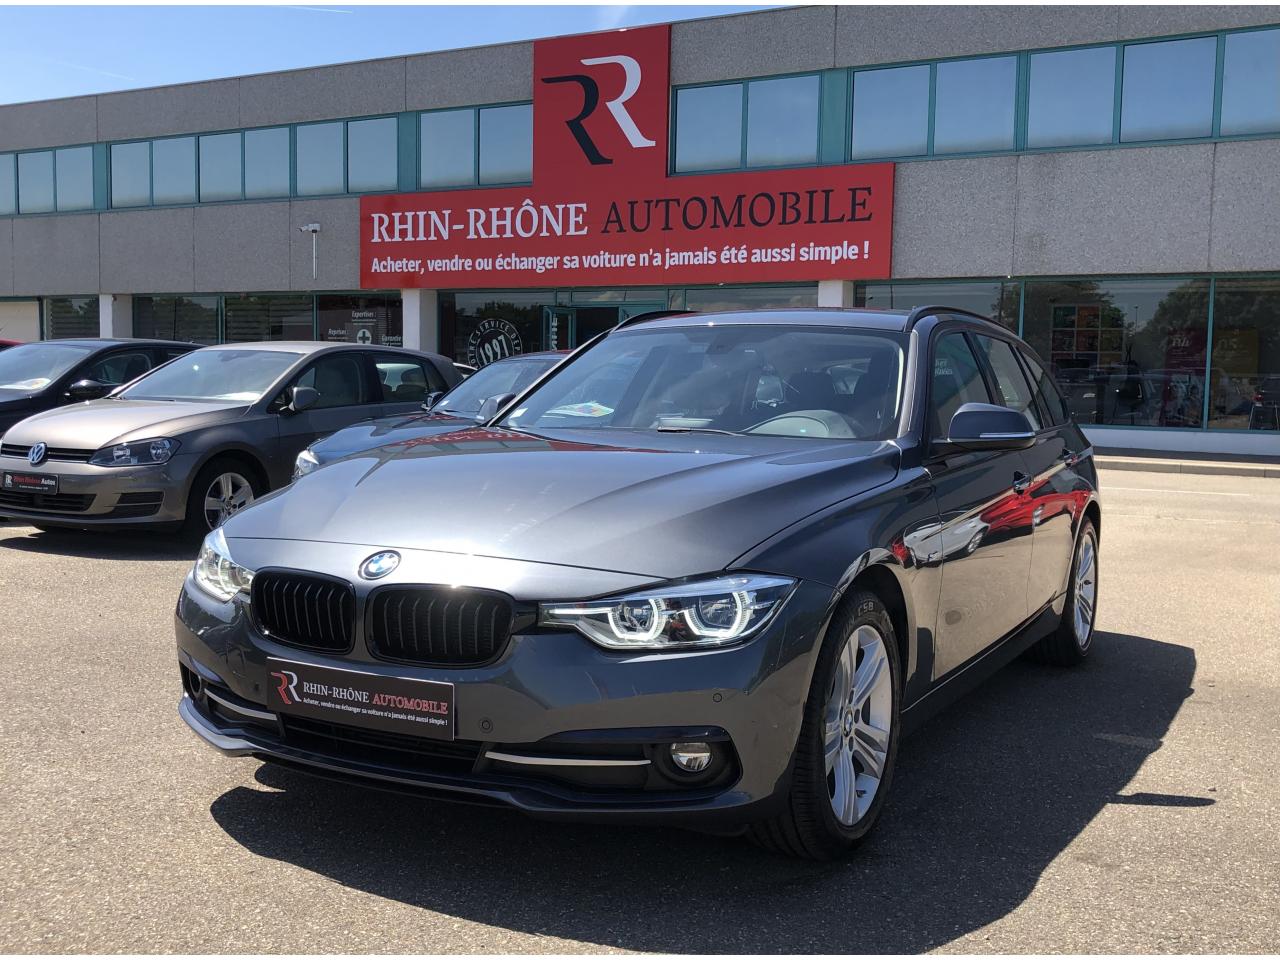 BMW-SERIE 3-Touring 318d Sportline 150ch 1erMain Gps+Full Led+Sieges chauffant